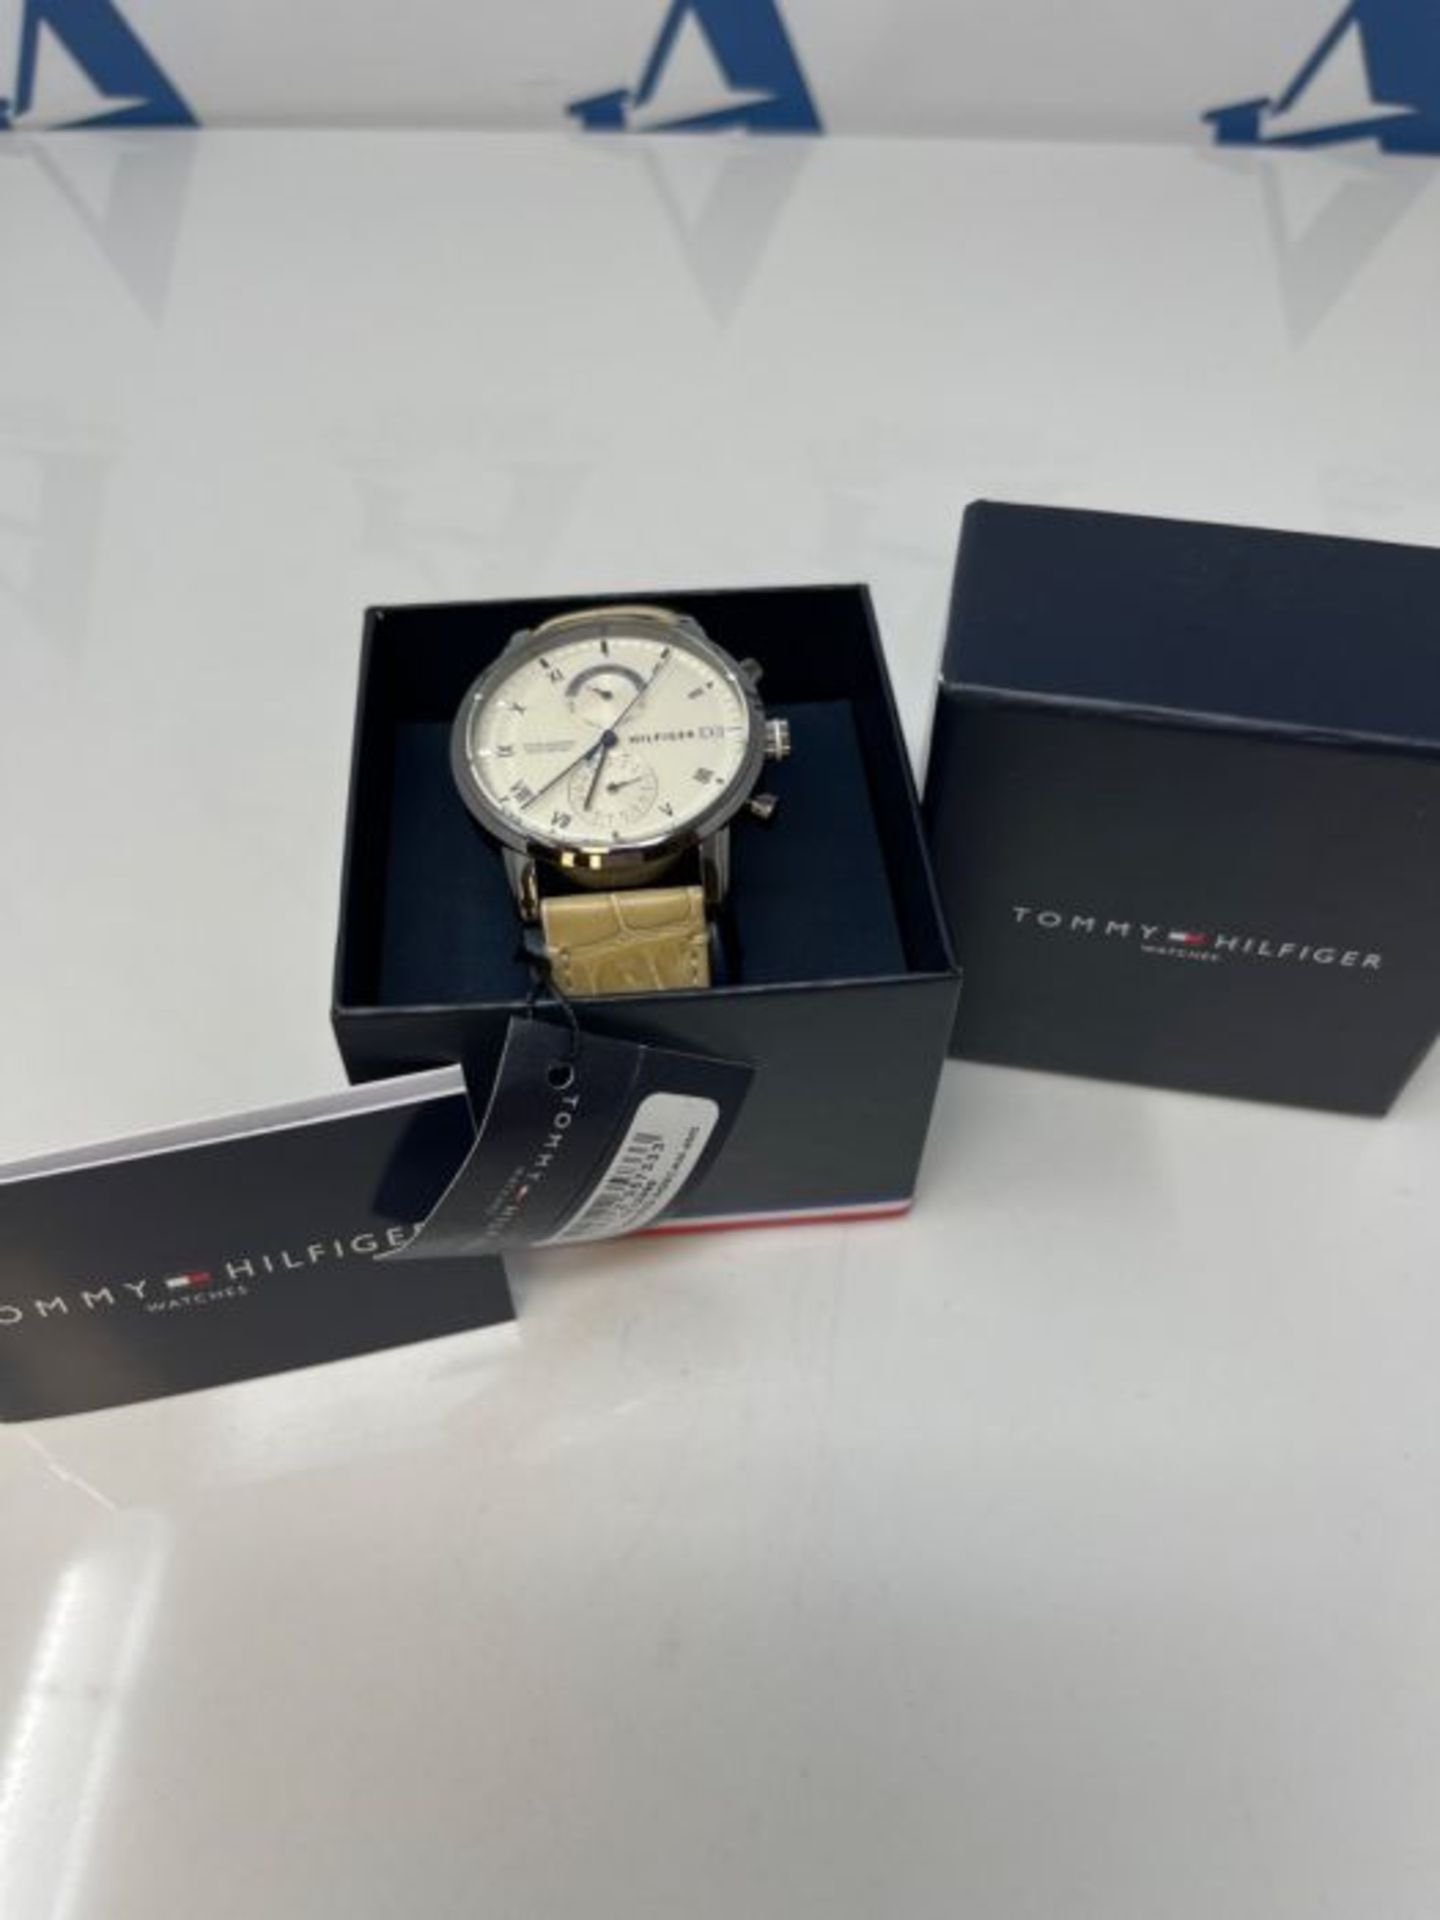 RRP £99.00 Tommy Hilfiger Men's Analogue Quartz Watch with Leather Strap 1710399 - Image 2 of 3